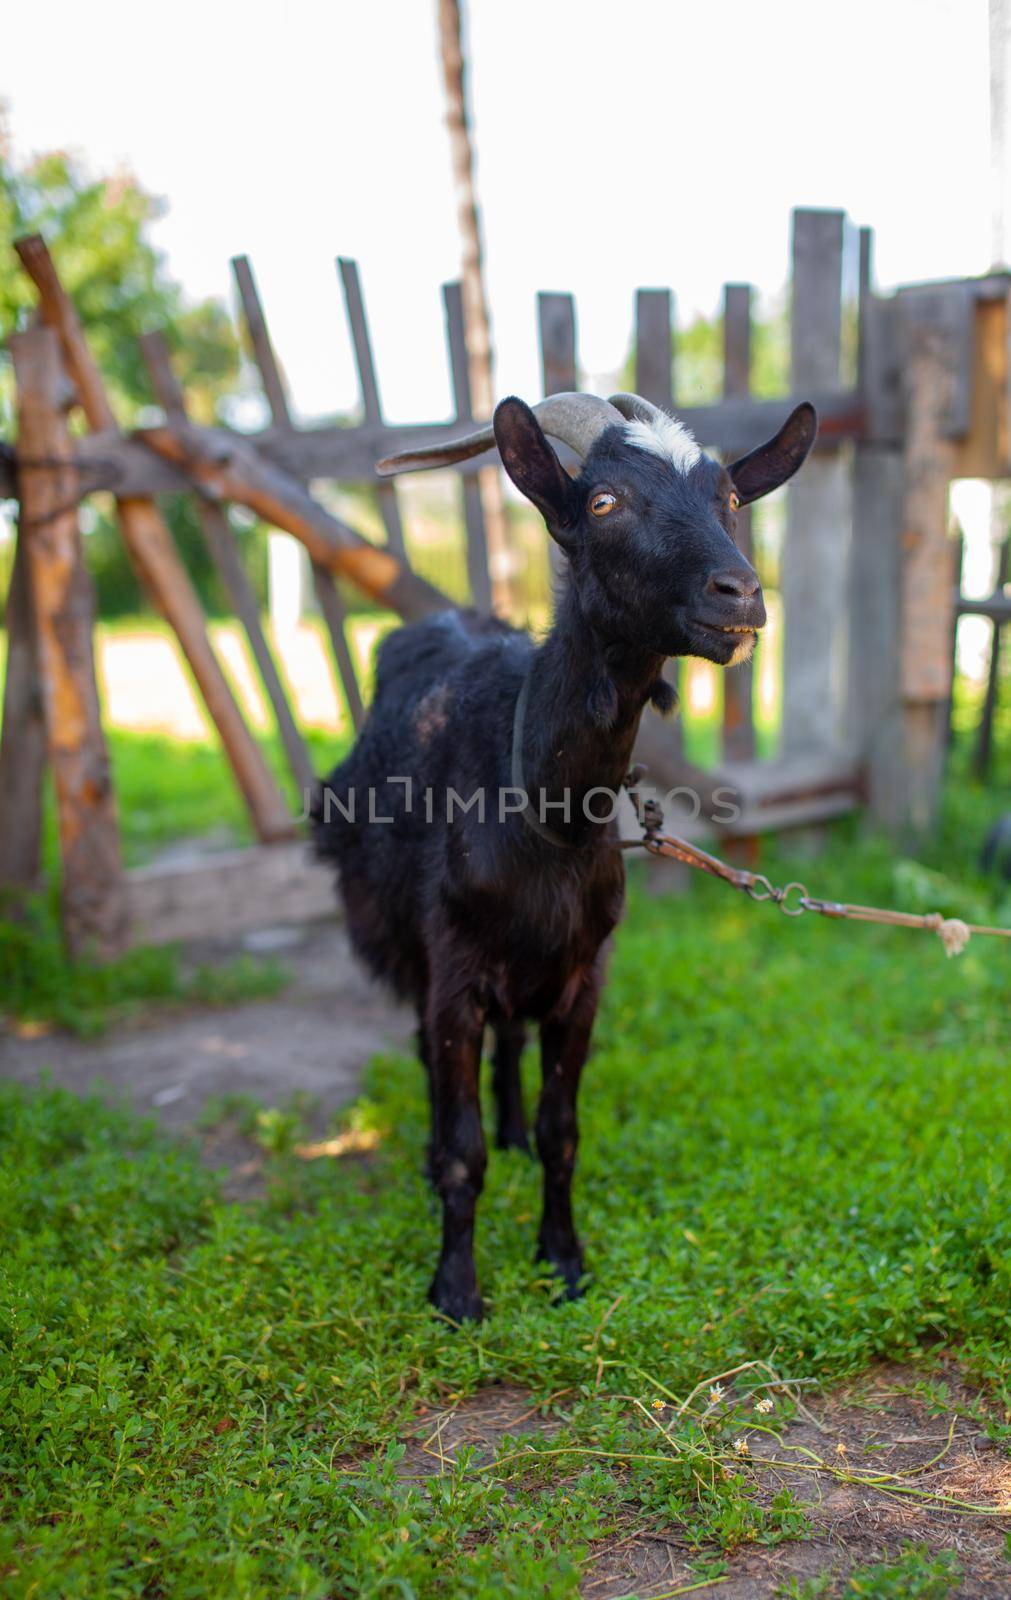 A black goat behind a wooden fence in the village poses for the camera. Breeding of domestic animals and cattle.